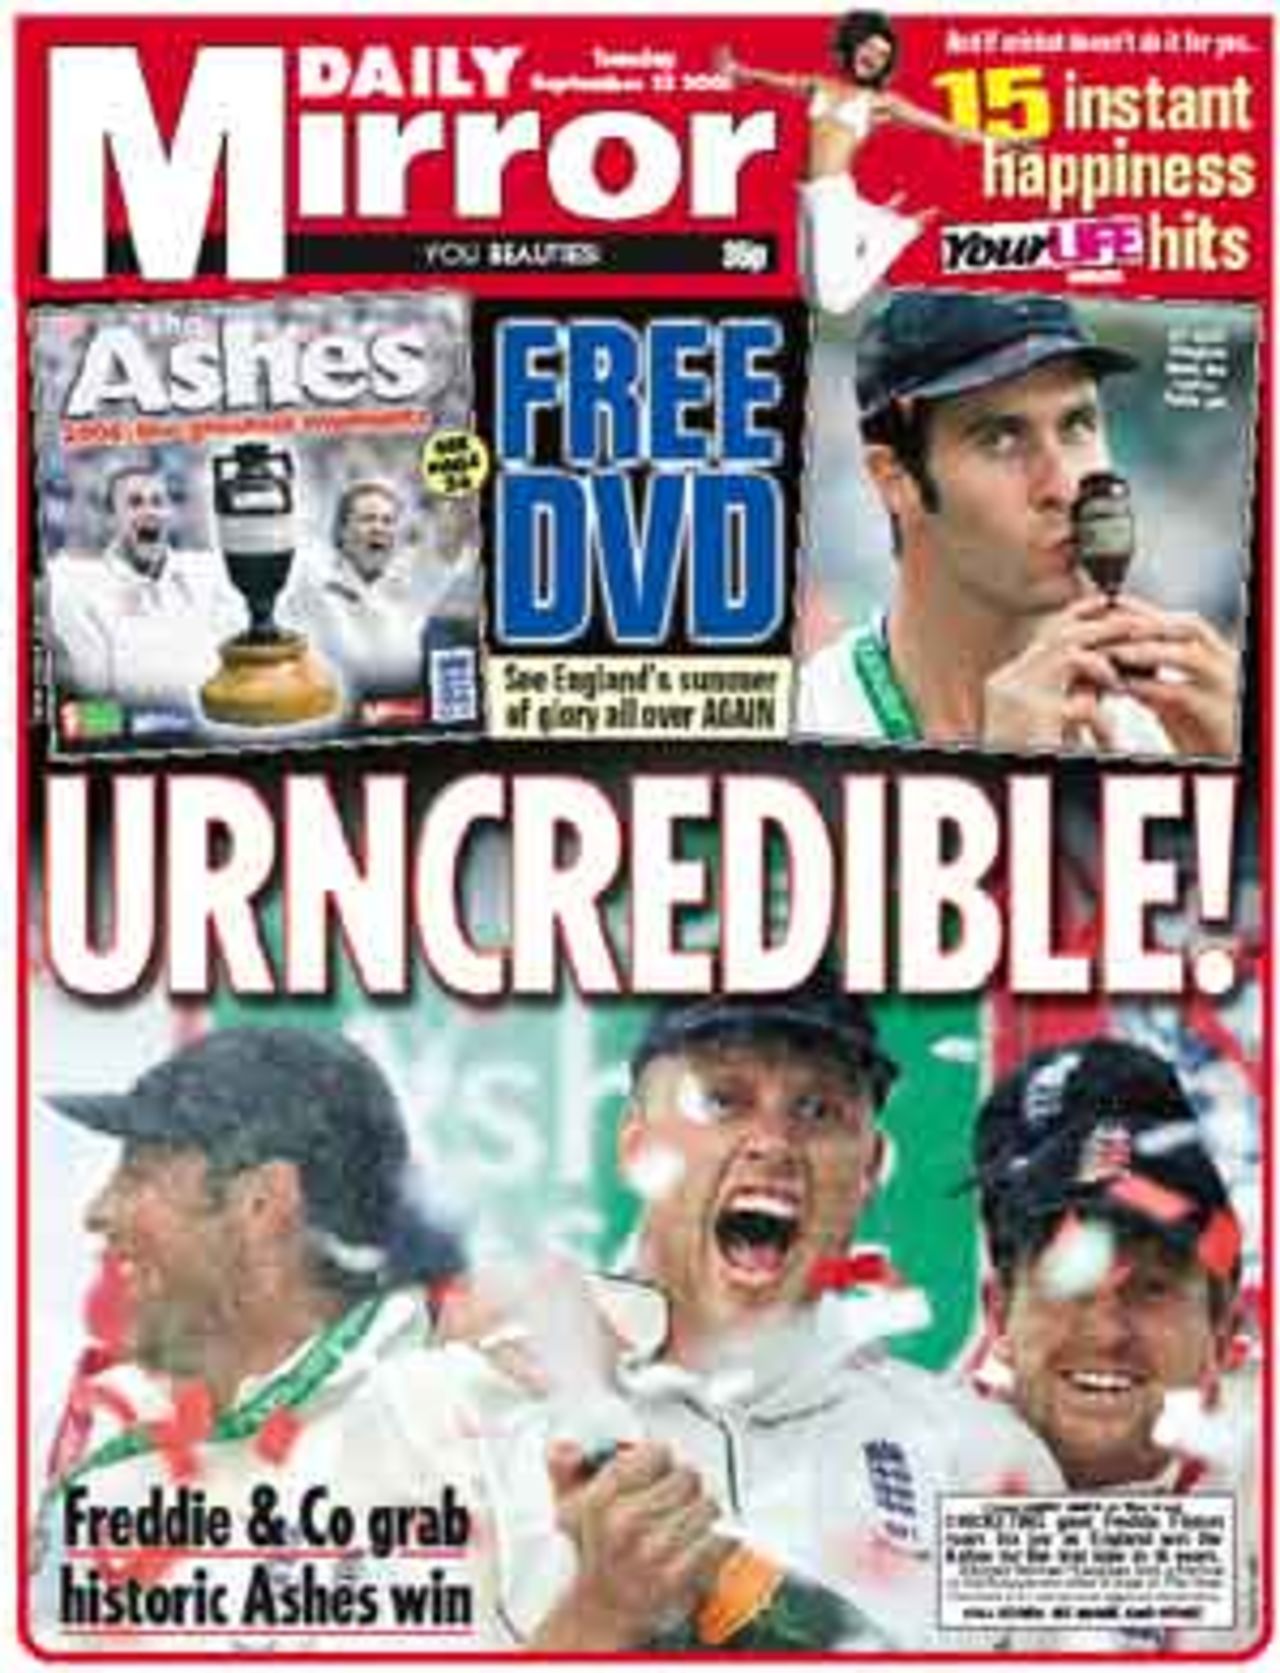 The front page of <I>The Mirror</I>, September 13, 2005